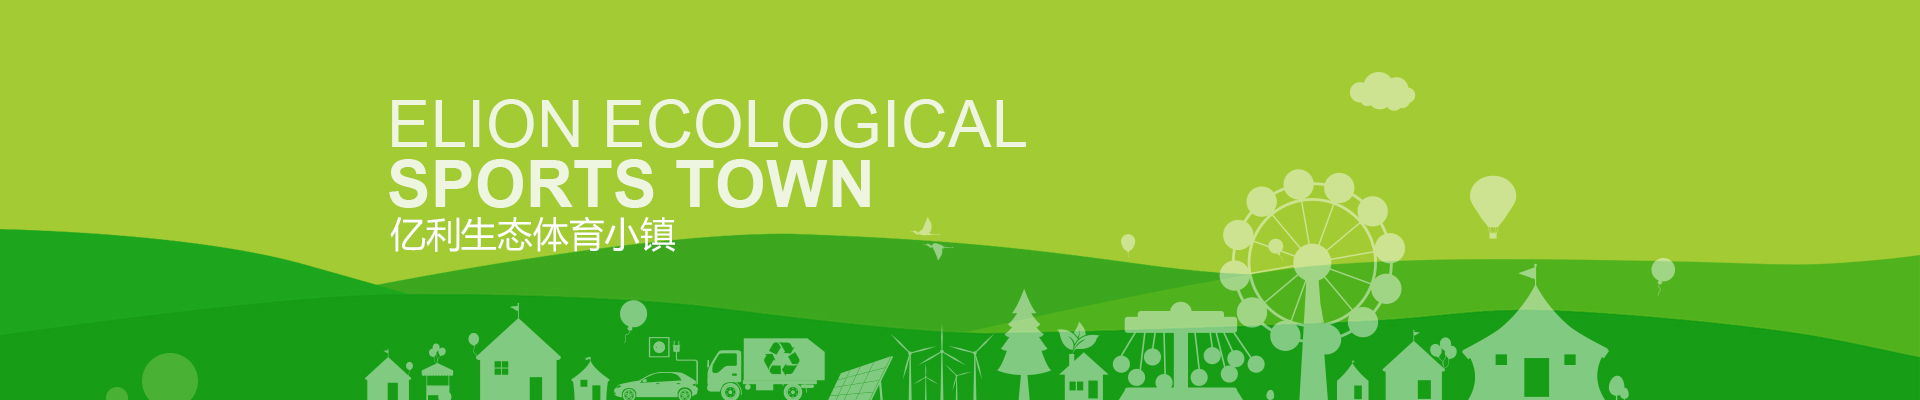 Ecological Sports Town